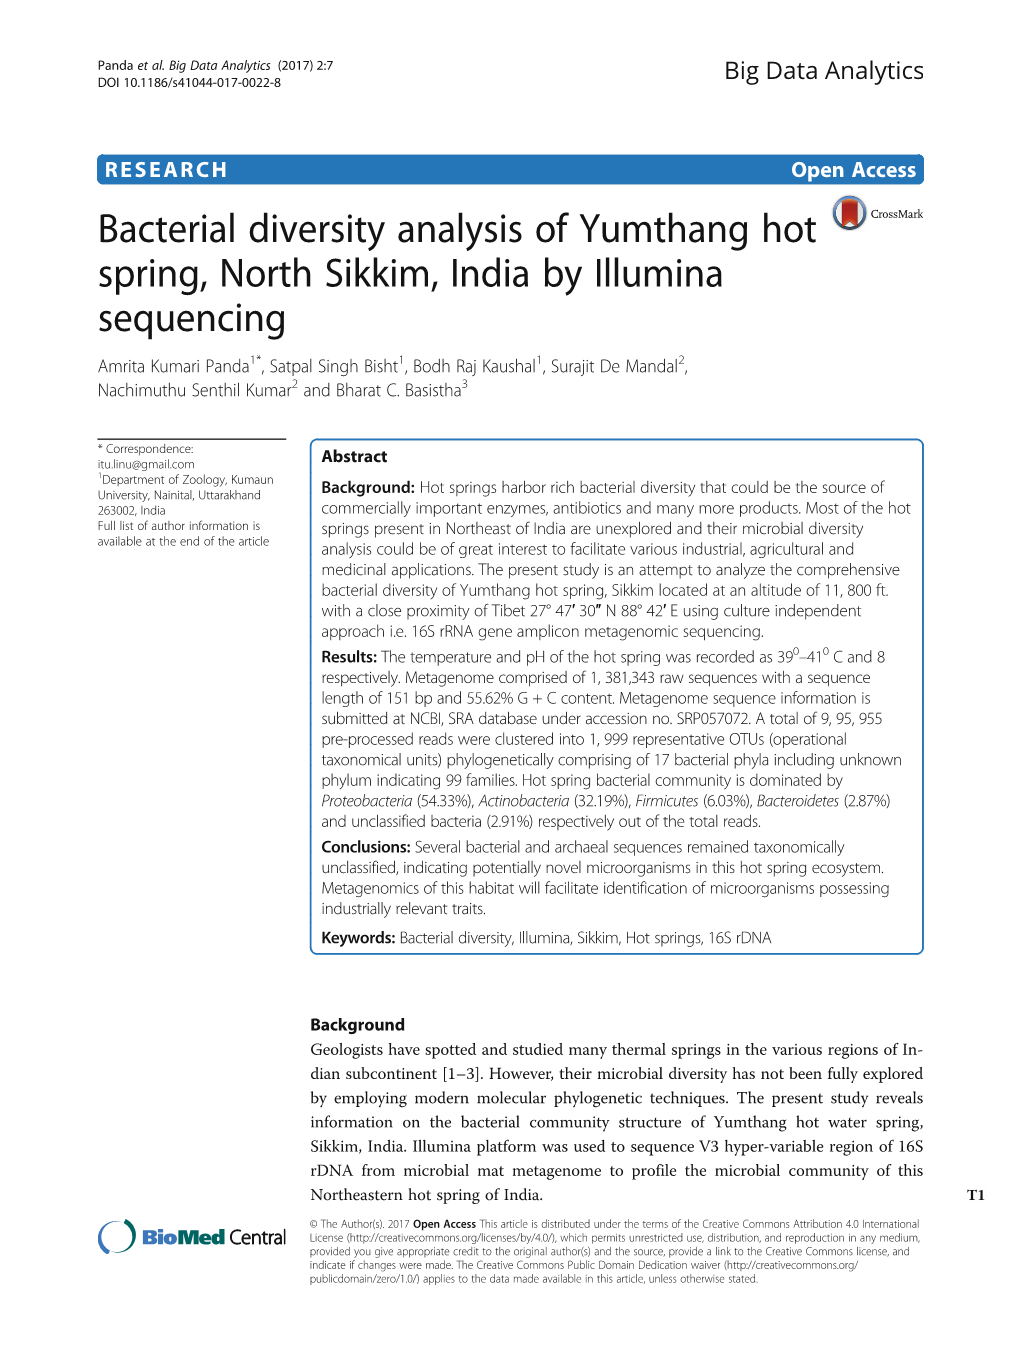 Bacterial Diversity Analysis of Yumthang Hot Spring, North Sikkim